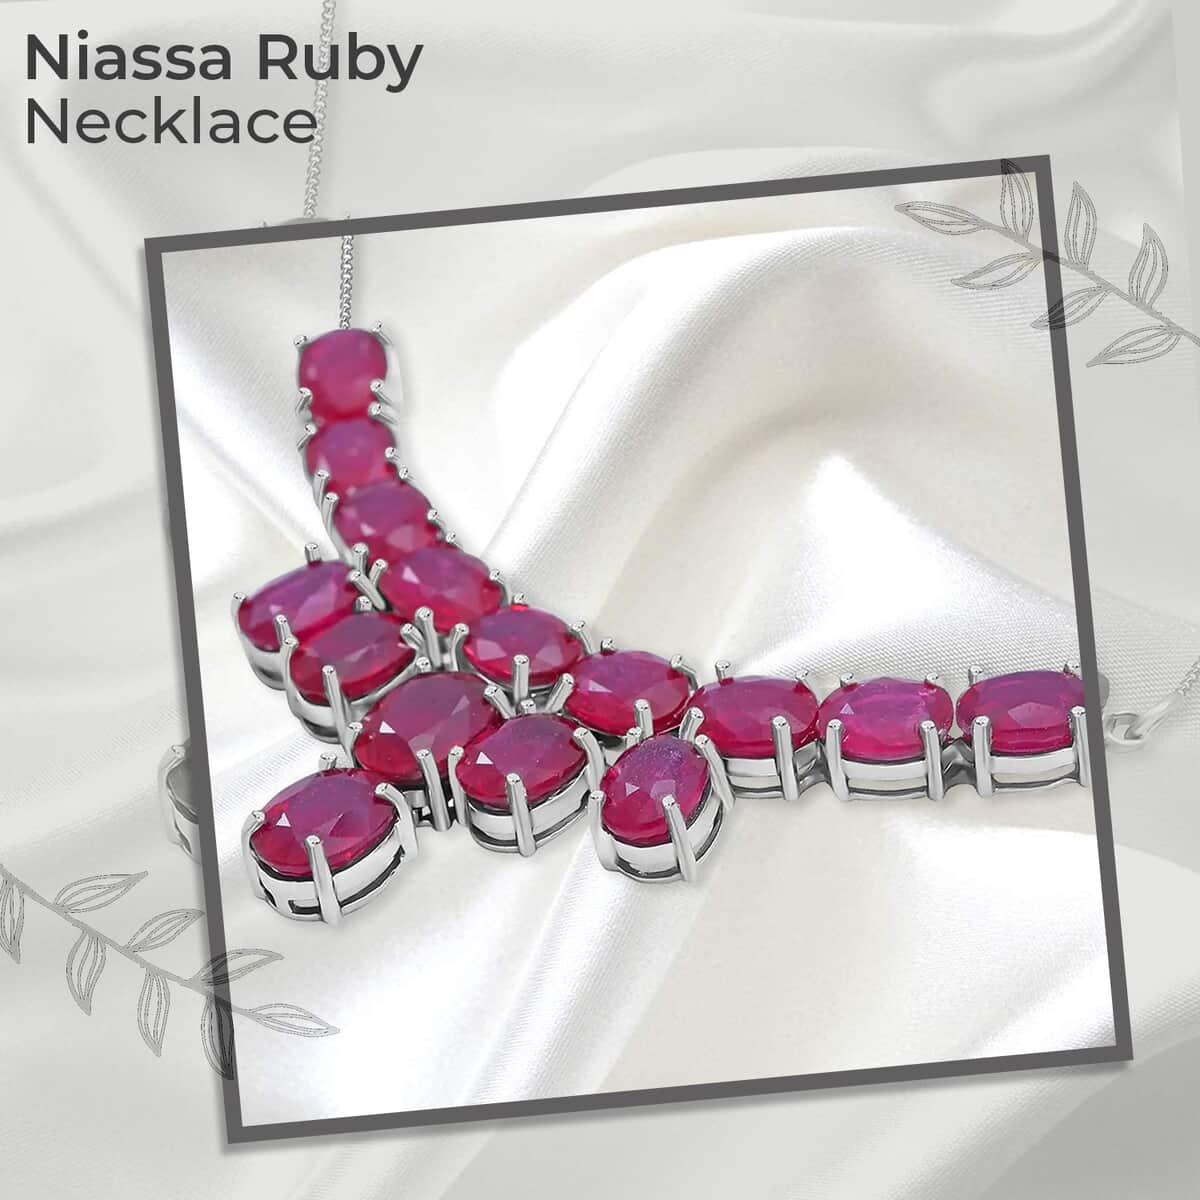 Niassa Ruby Necklace, Ruby Waterfall Necklace, Platinum Over Sterling Silver Necklace, 18 Inch Necklace image number 1